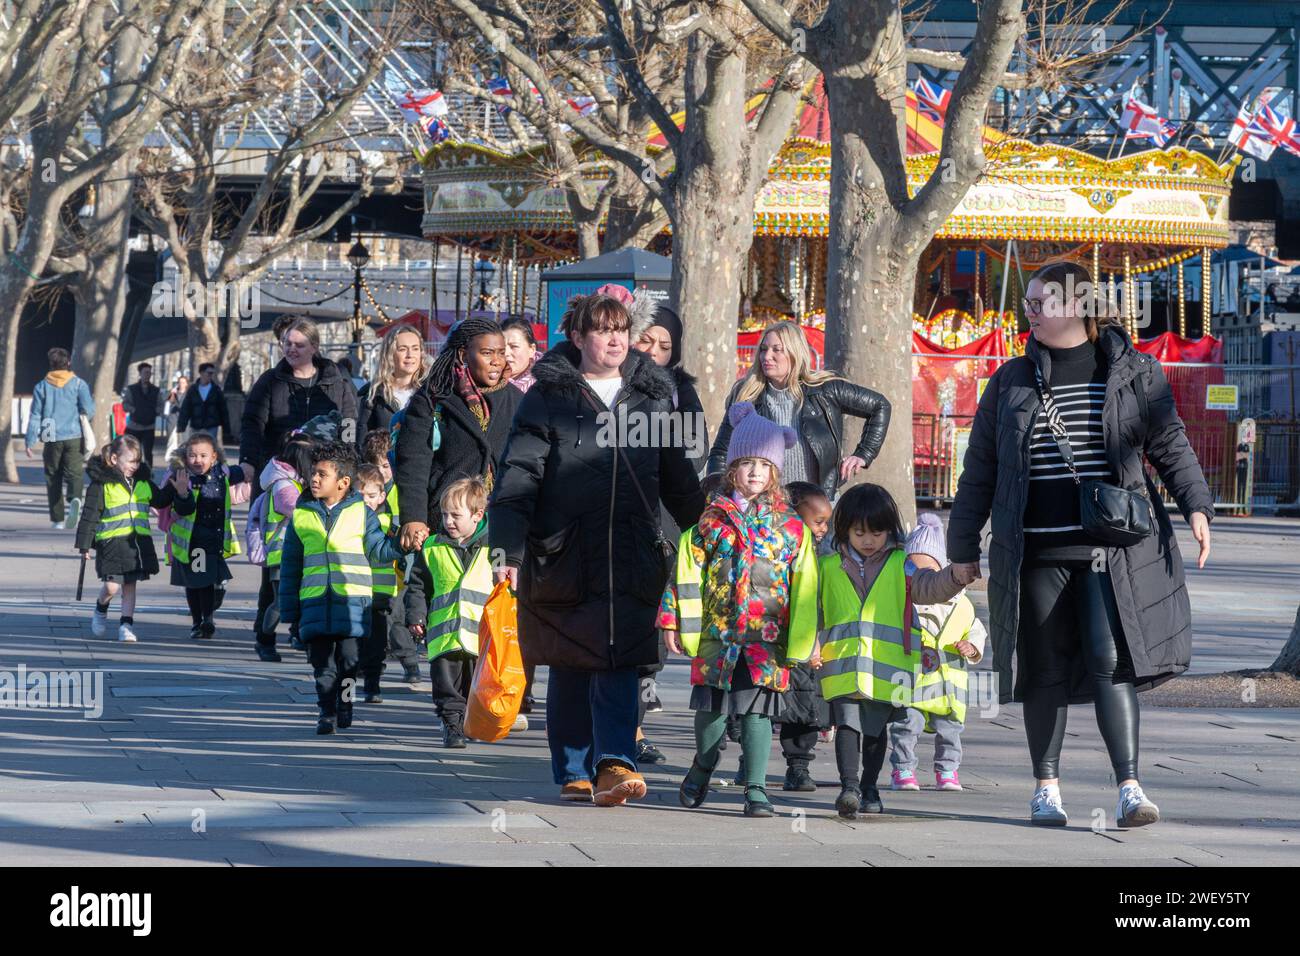 Nursery school children on a supervised walk or outing with teachers and teaching assistants, England, UK Stock Photo